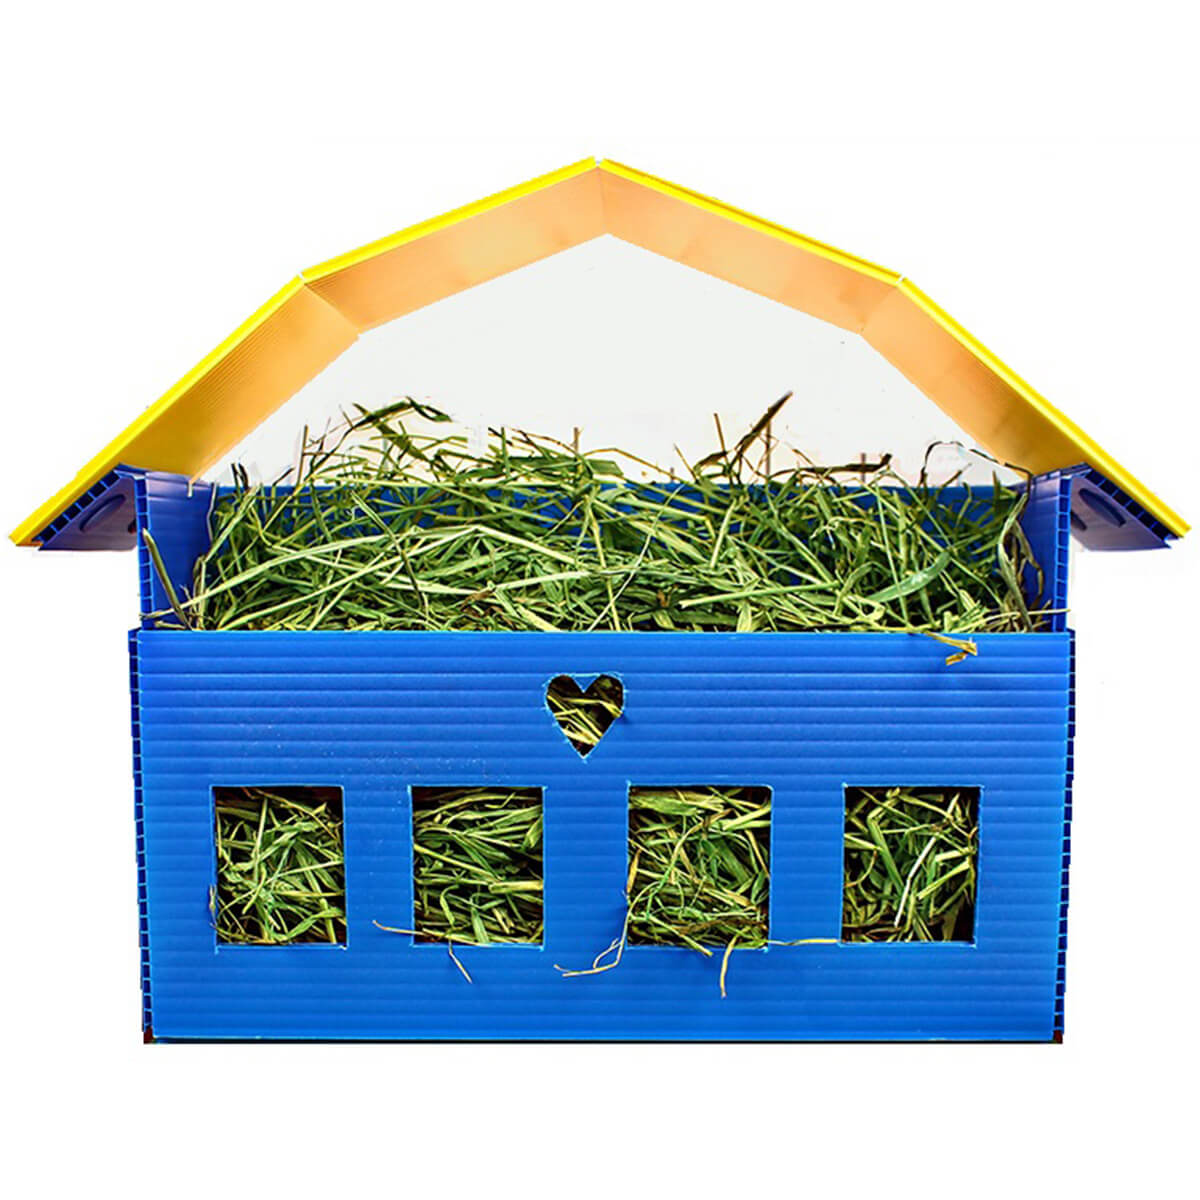 Hay Barn for a pet Guinea Pig Cage - hay rack, hay box, hay container